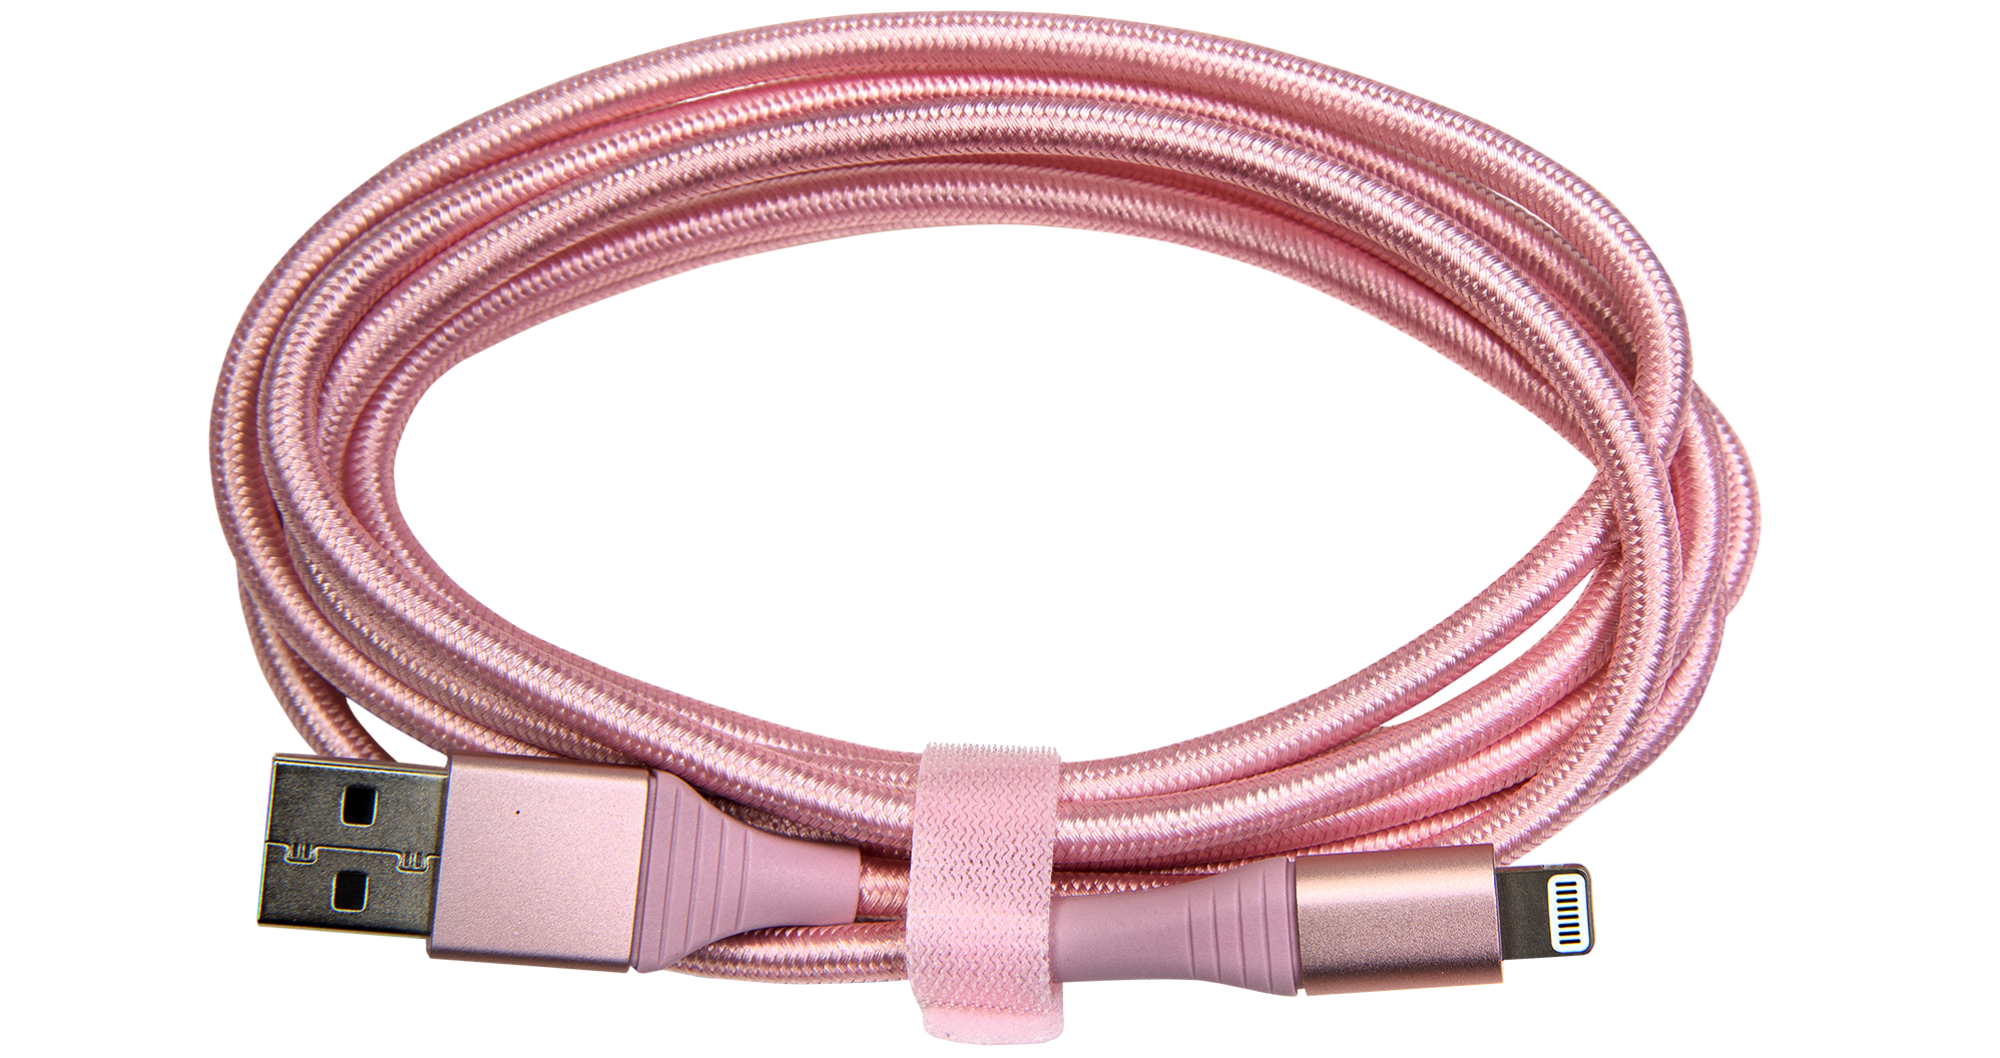 Amazon Basics 6-foot lightning charging cable in pink